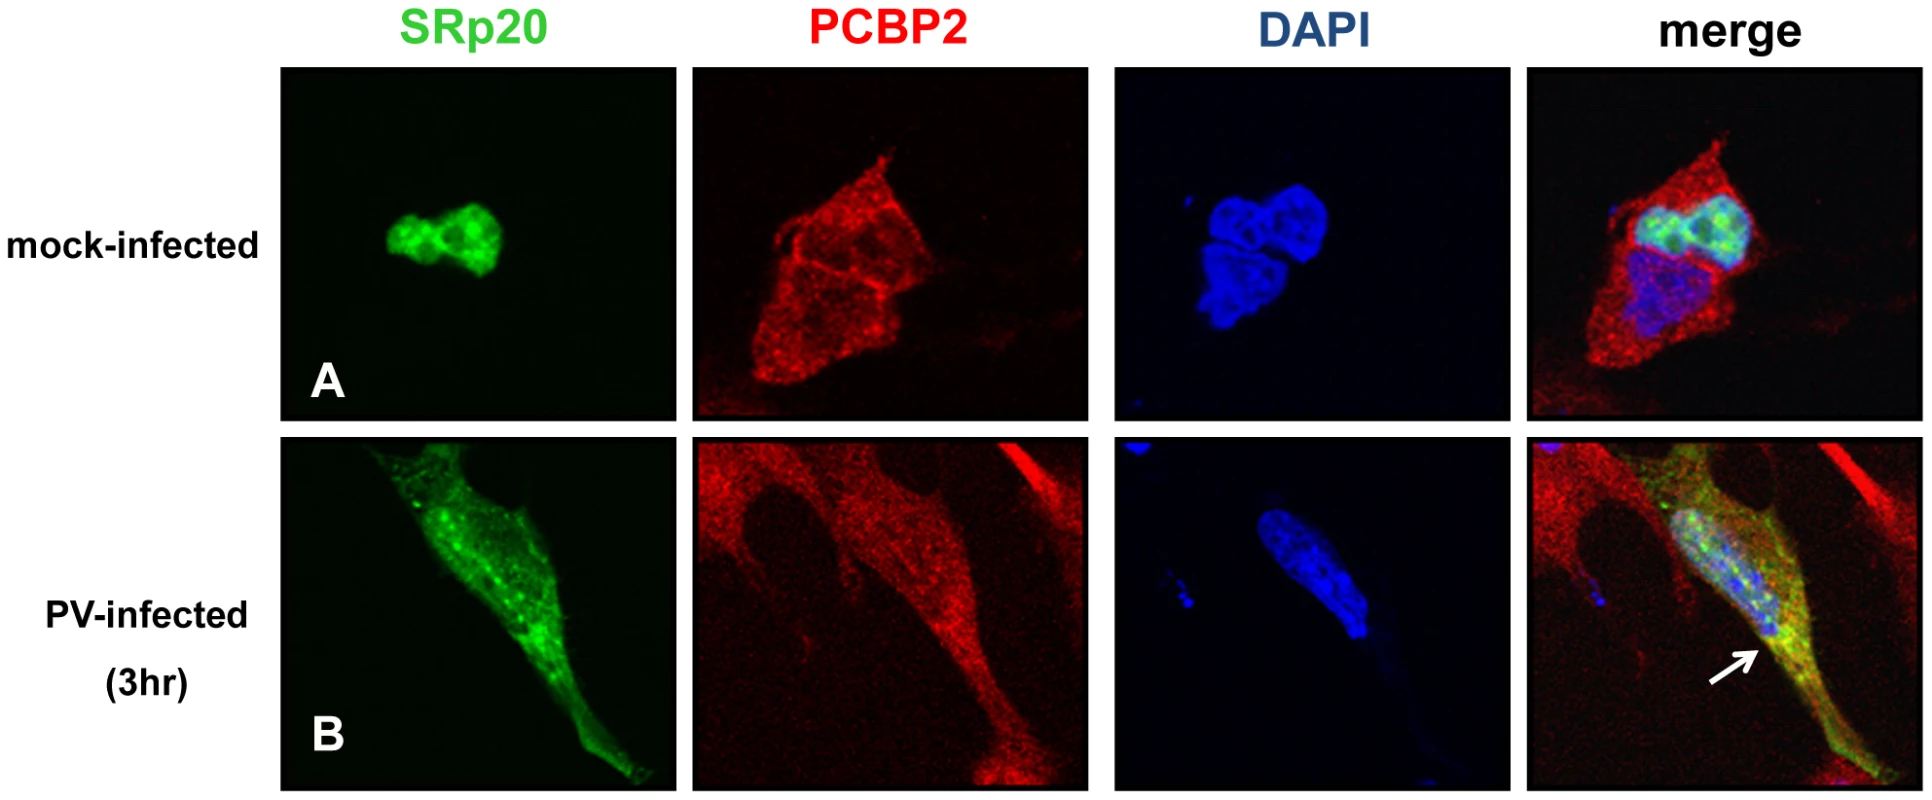 SRp20 partial co-localization with PCBP2 in the cytoplasm of poliovirus-infected SK-N-SH cells.